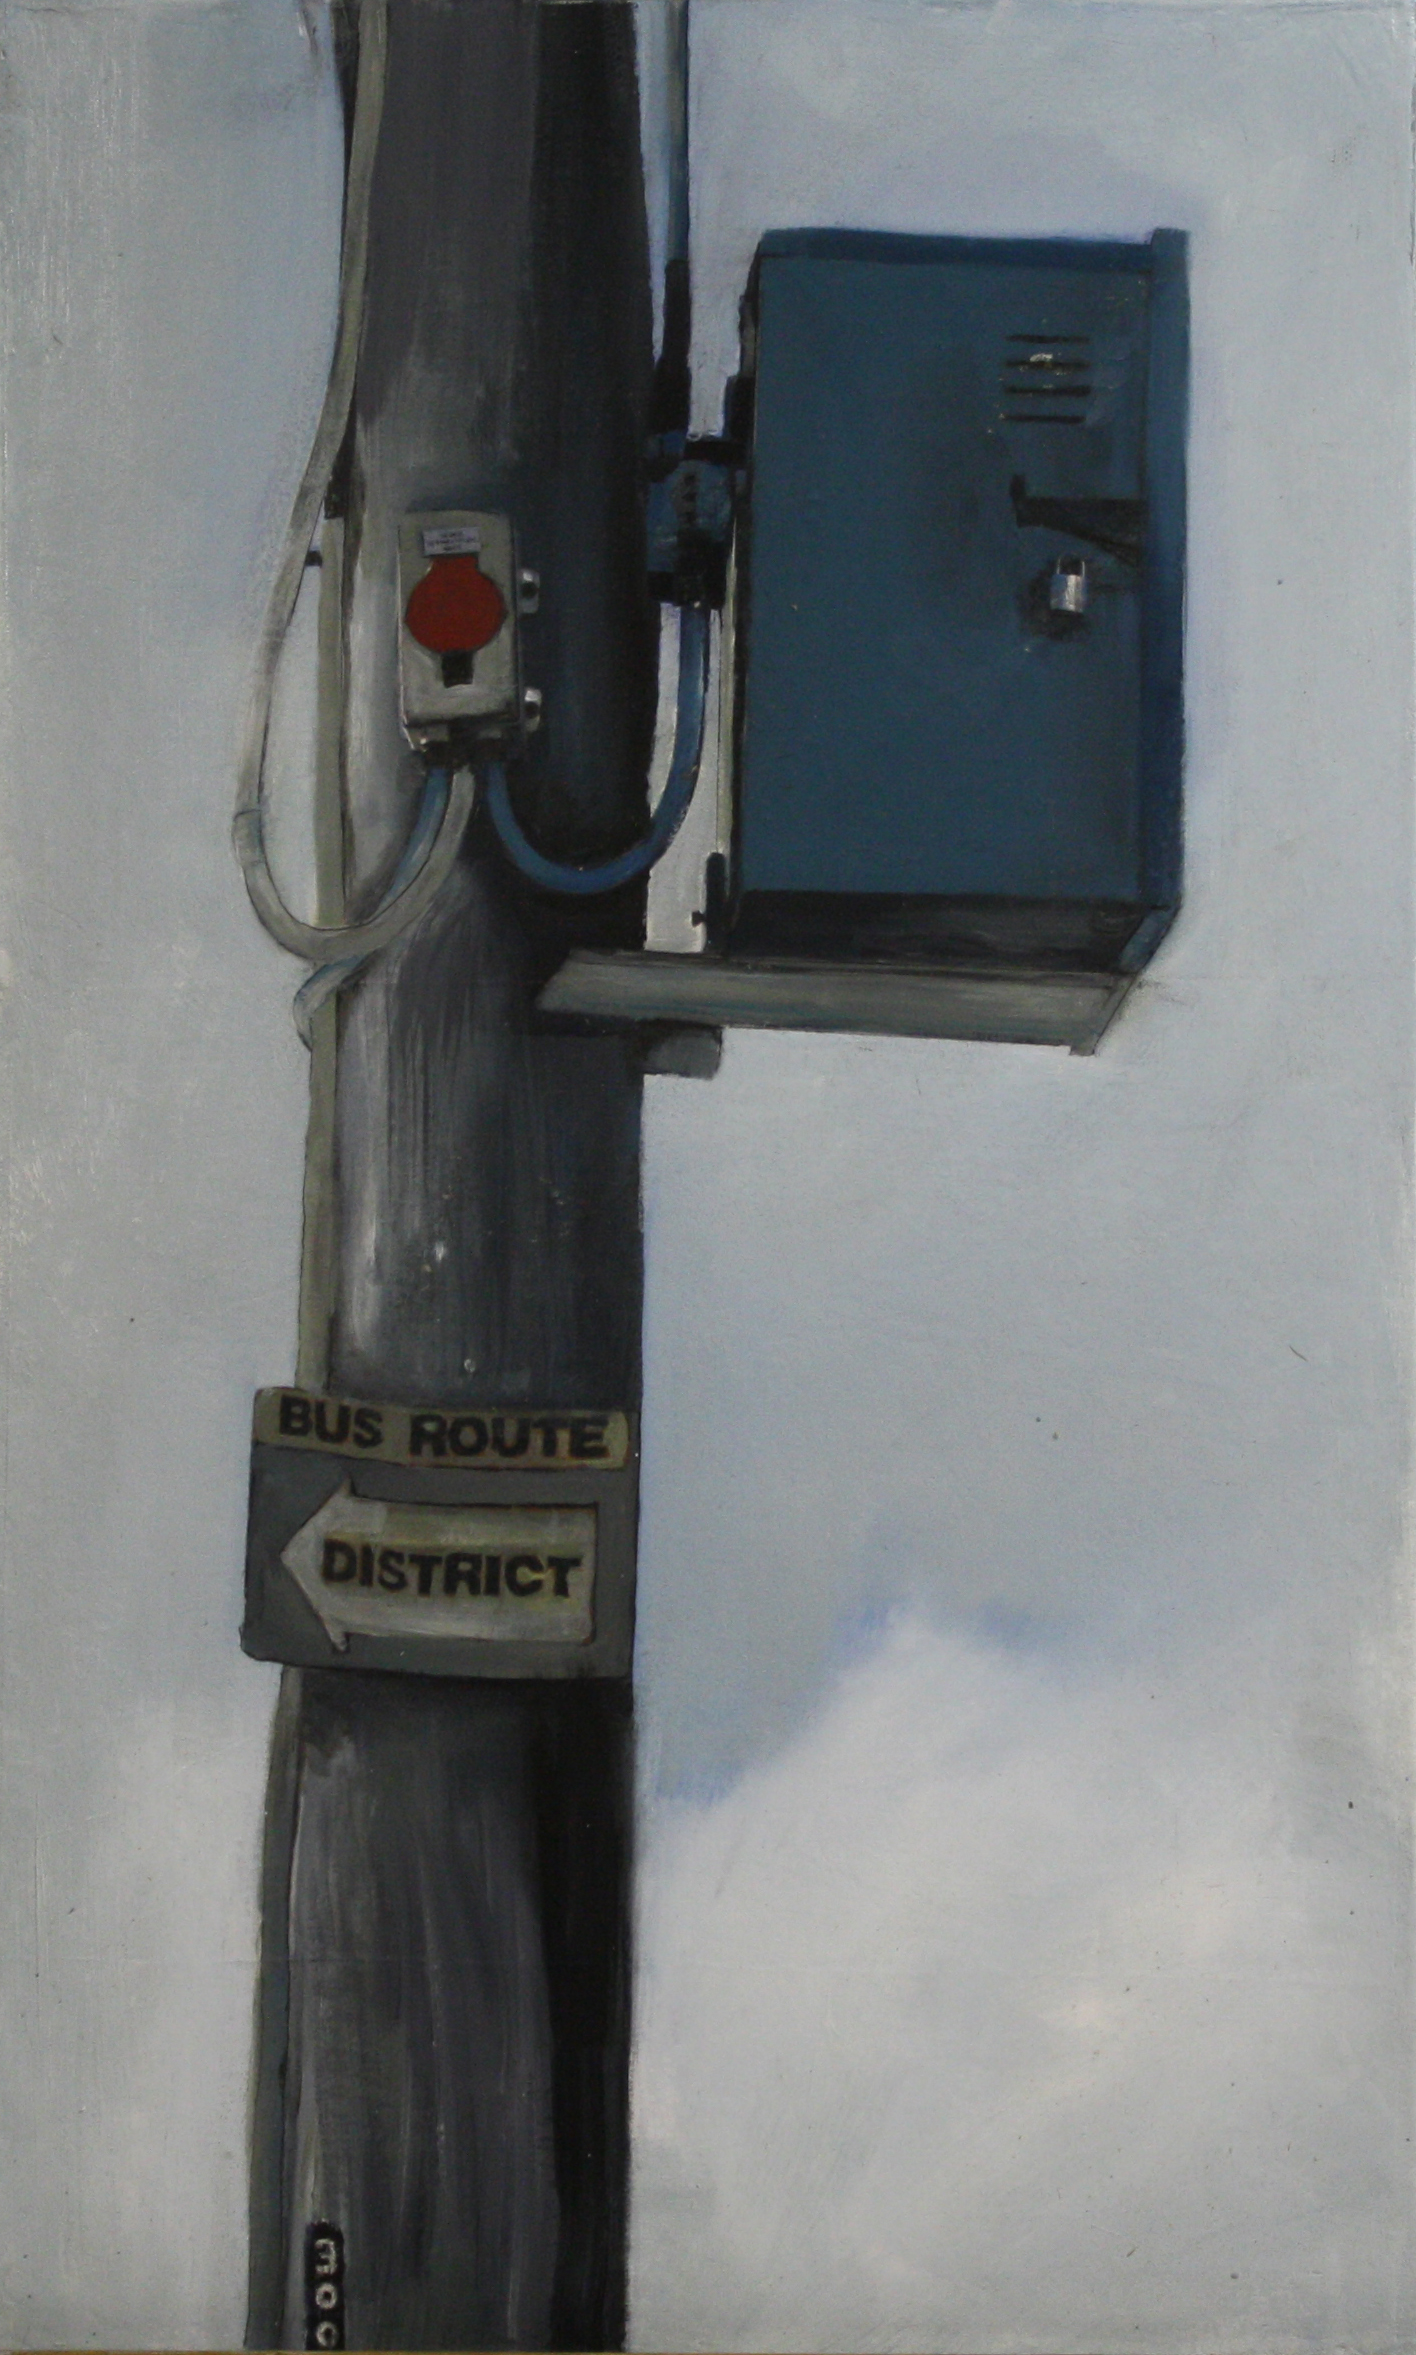  Stand Alone:  300   2011, oil on canvas on hardboard  50 x 76 cm           